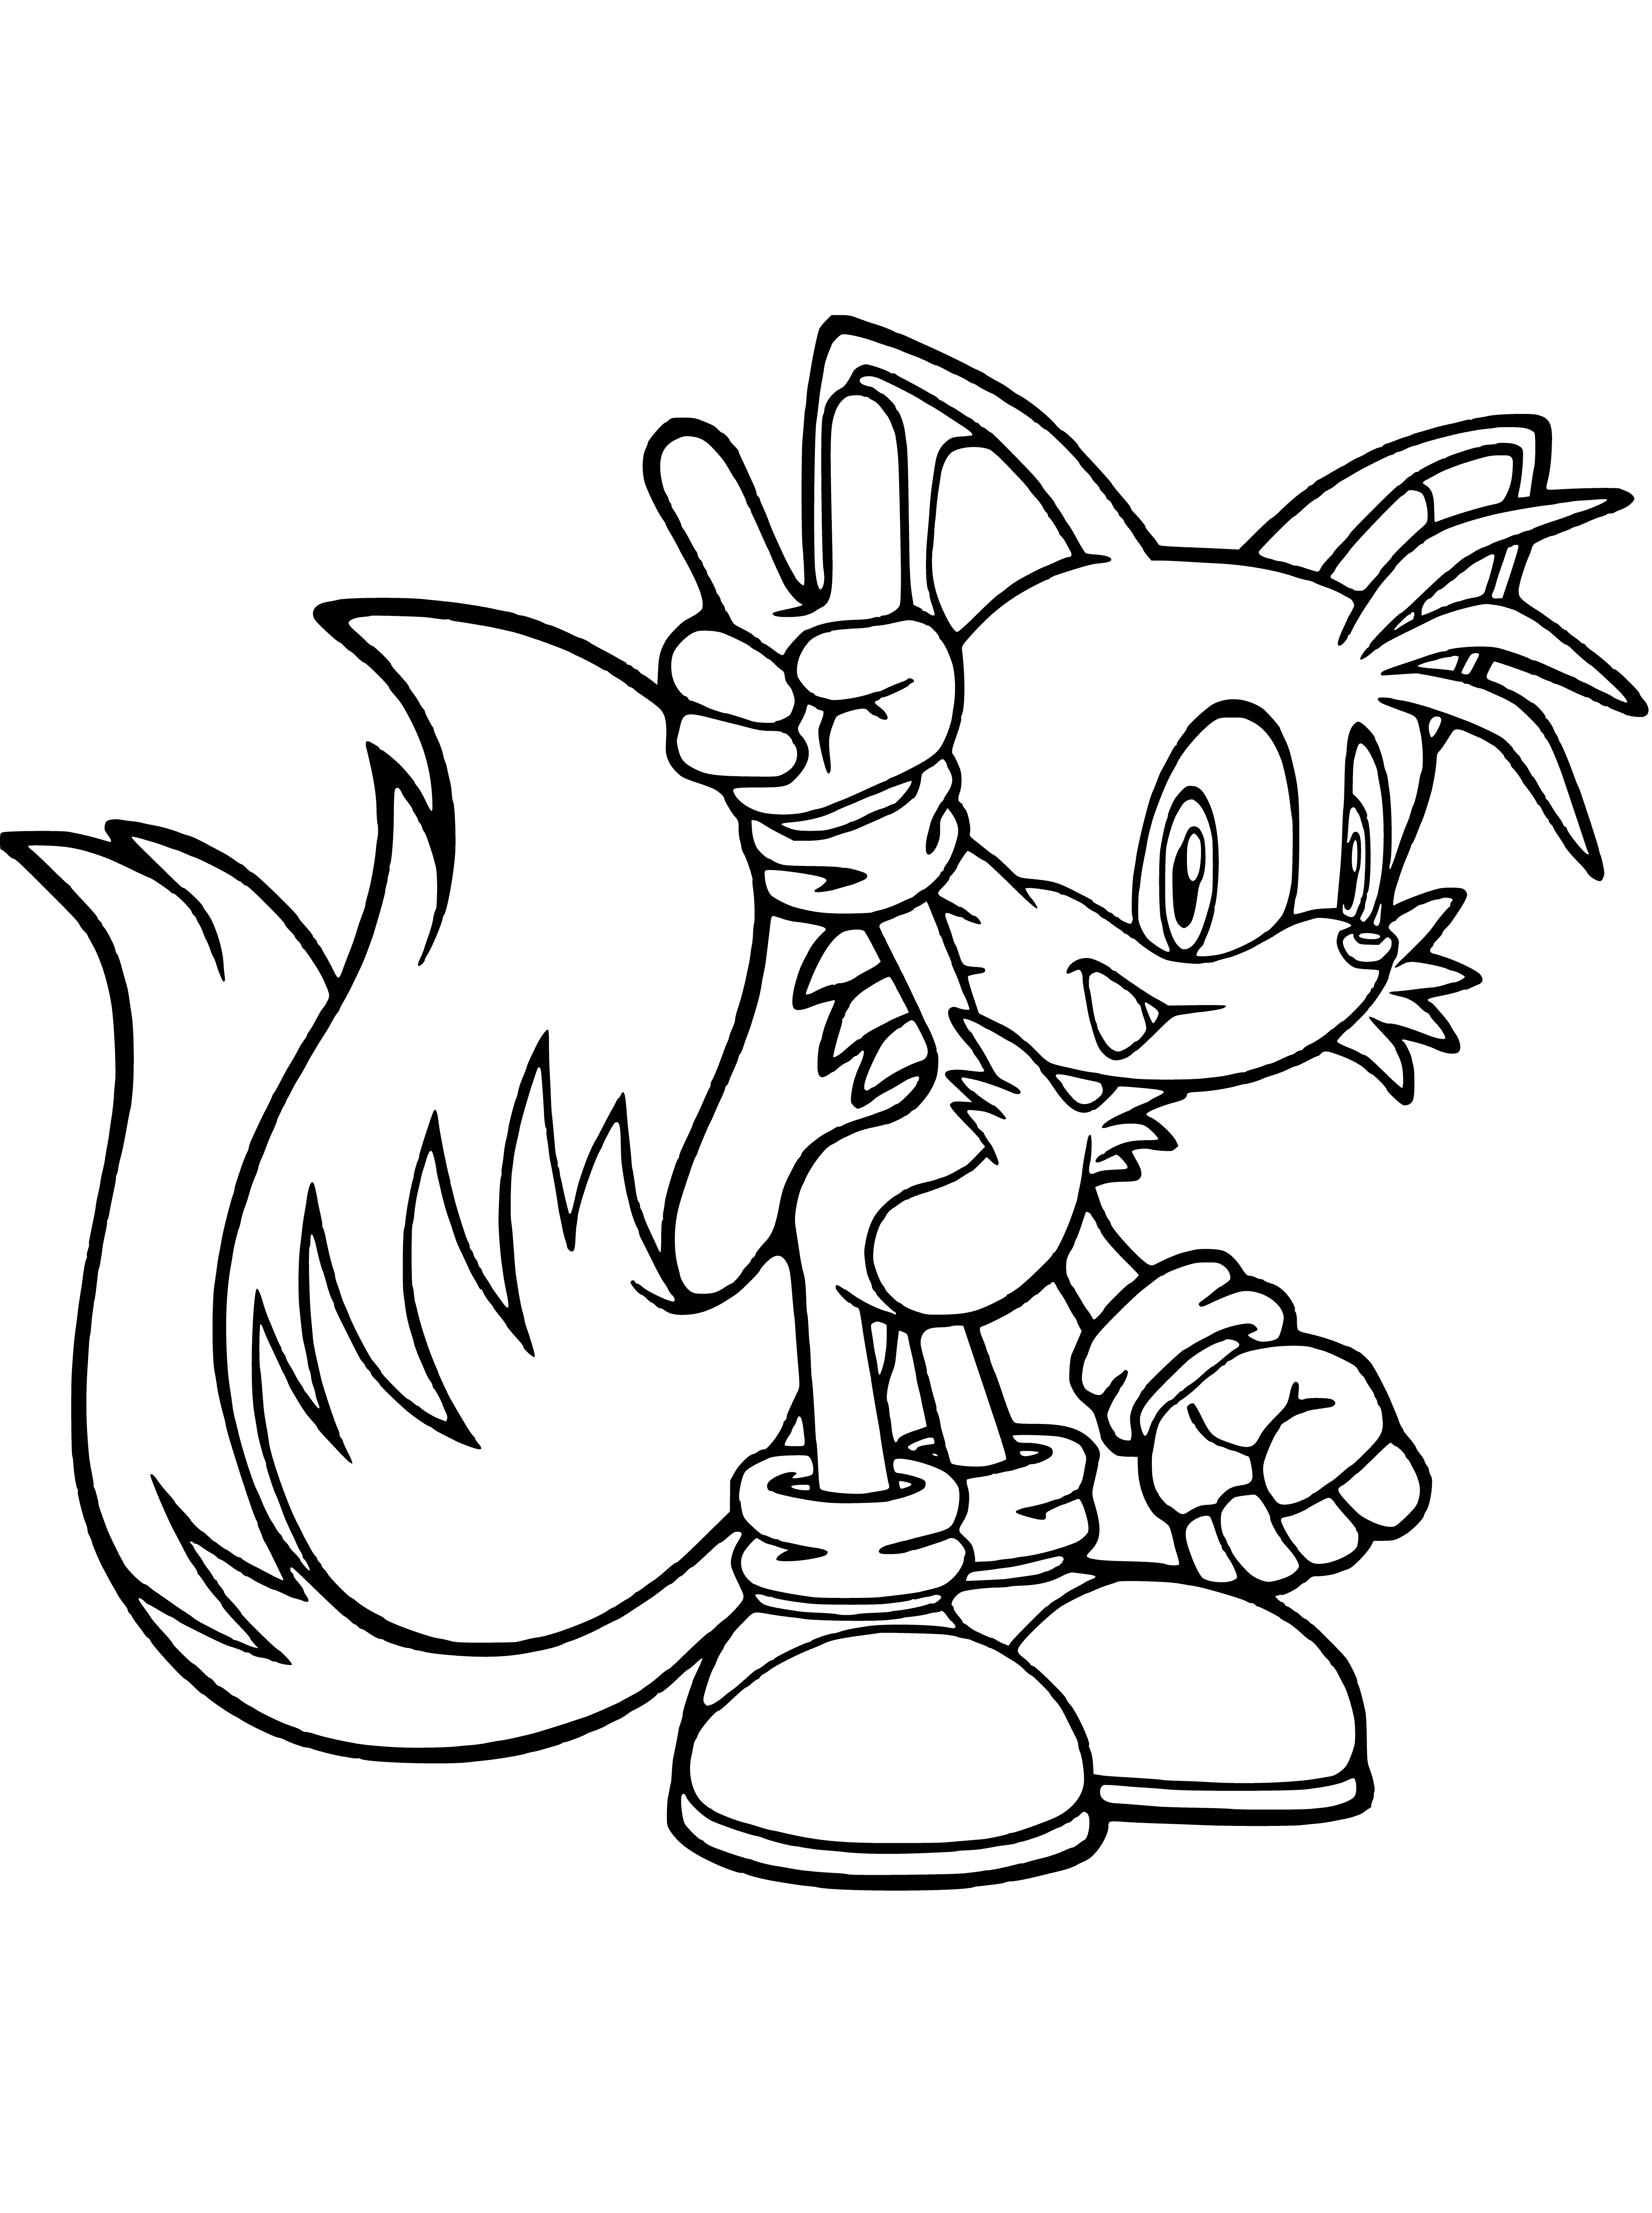 Miles coloring page